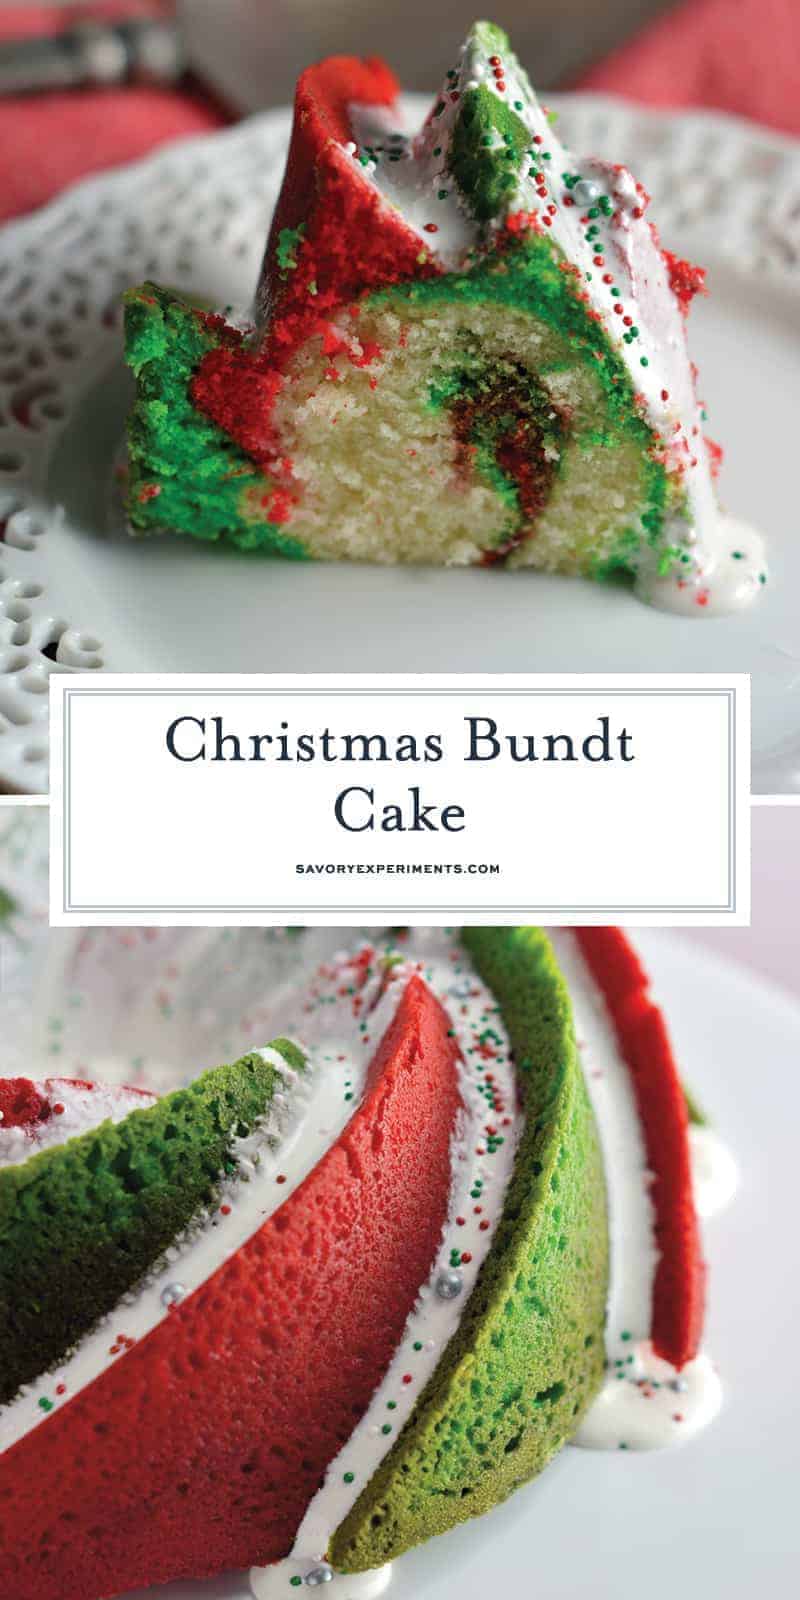 Christmas Bundt Cake is a delicious vanilla pound cake tinted with red and green swirls with a marshmallow fluff icing. Make this show stopping cake today! #bundtcakerecipes #christmascakes www.savoryexperiments.com 